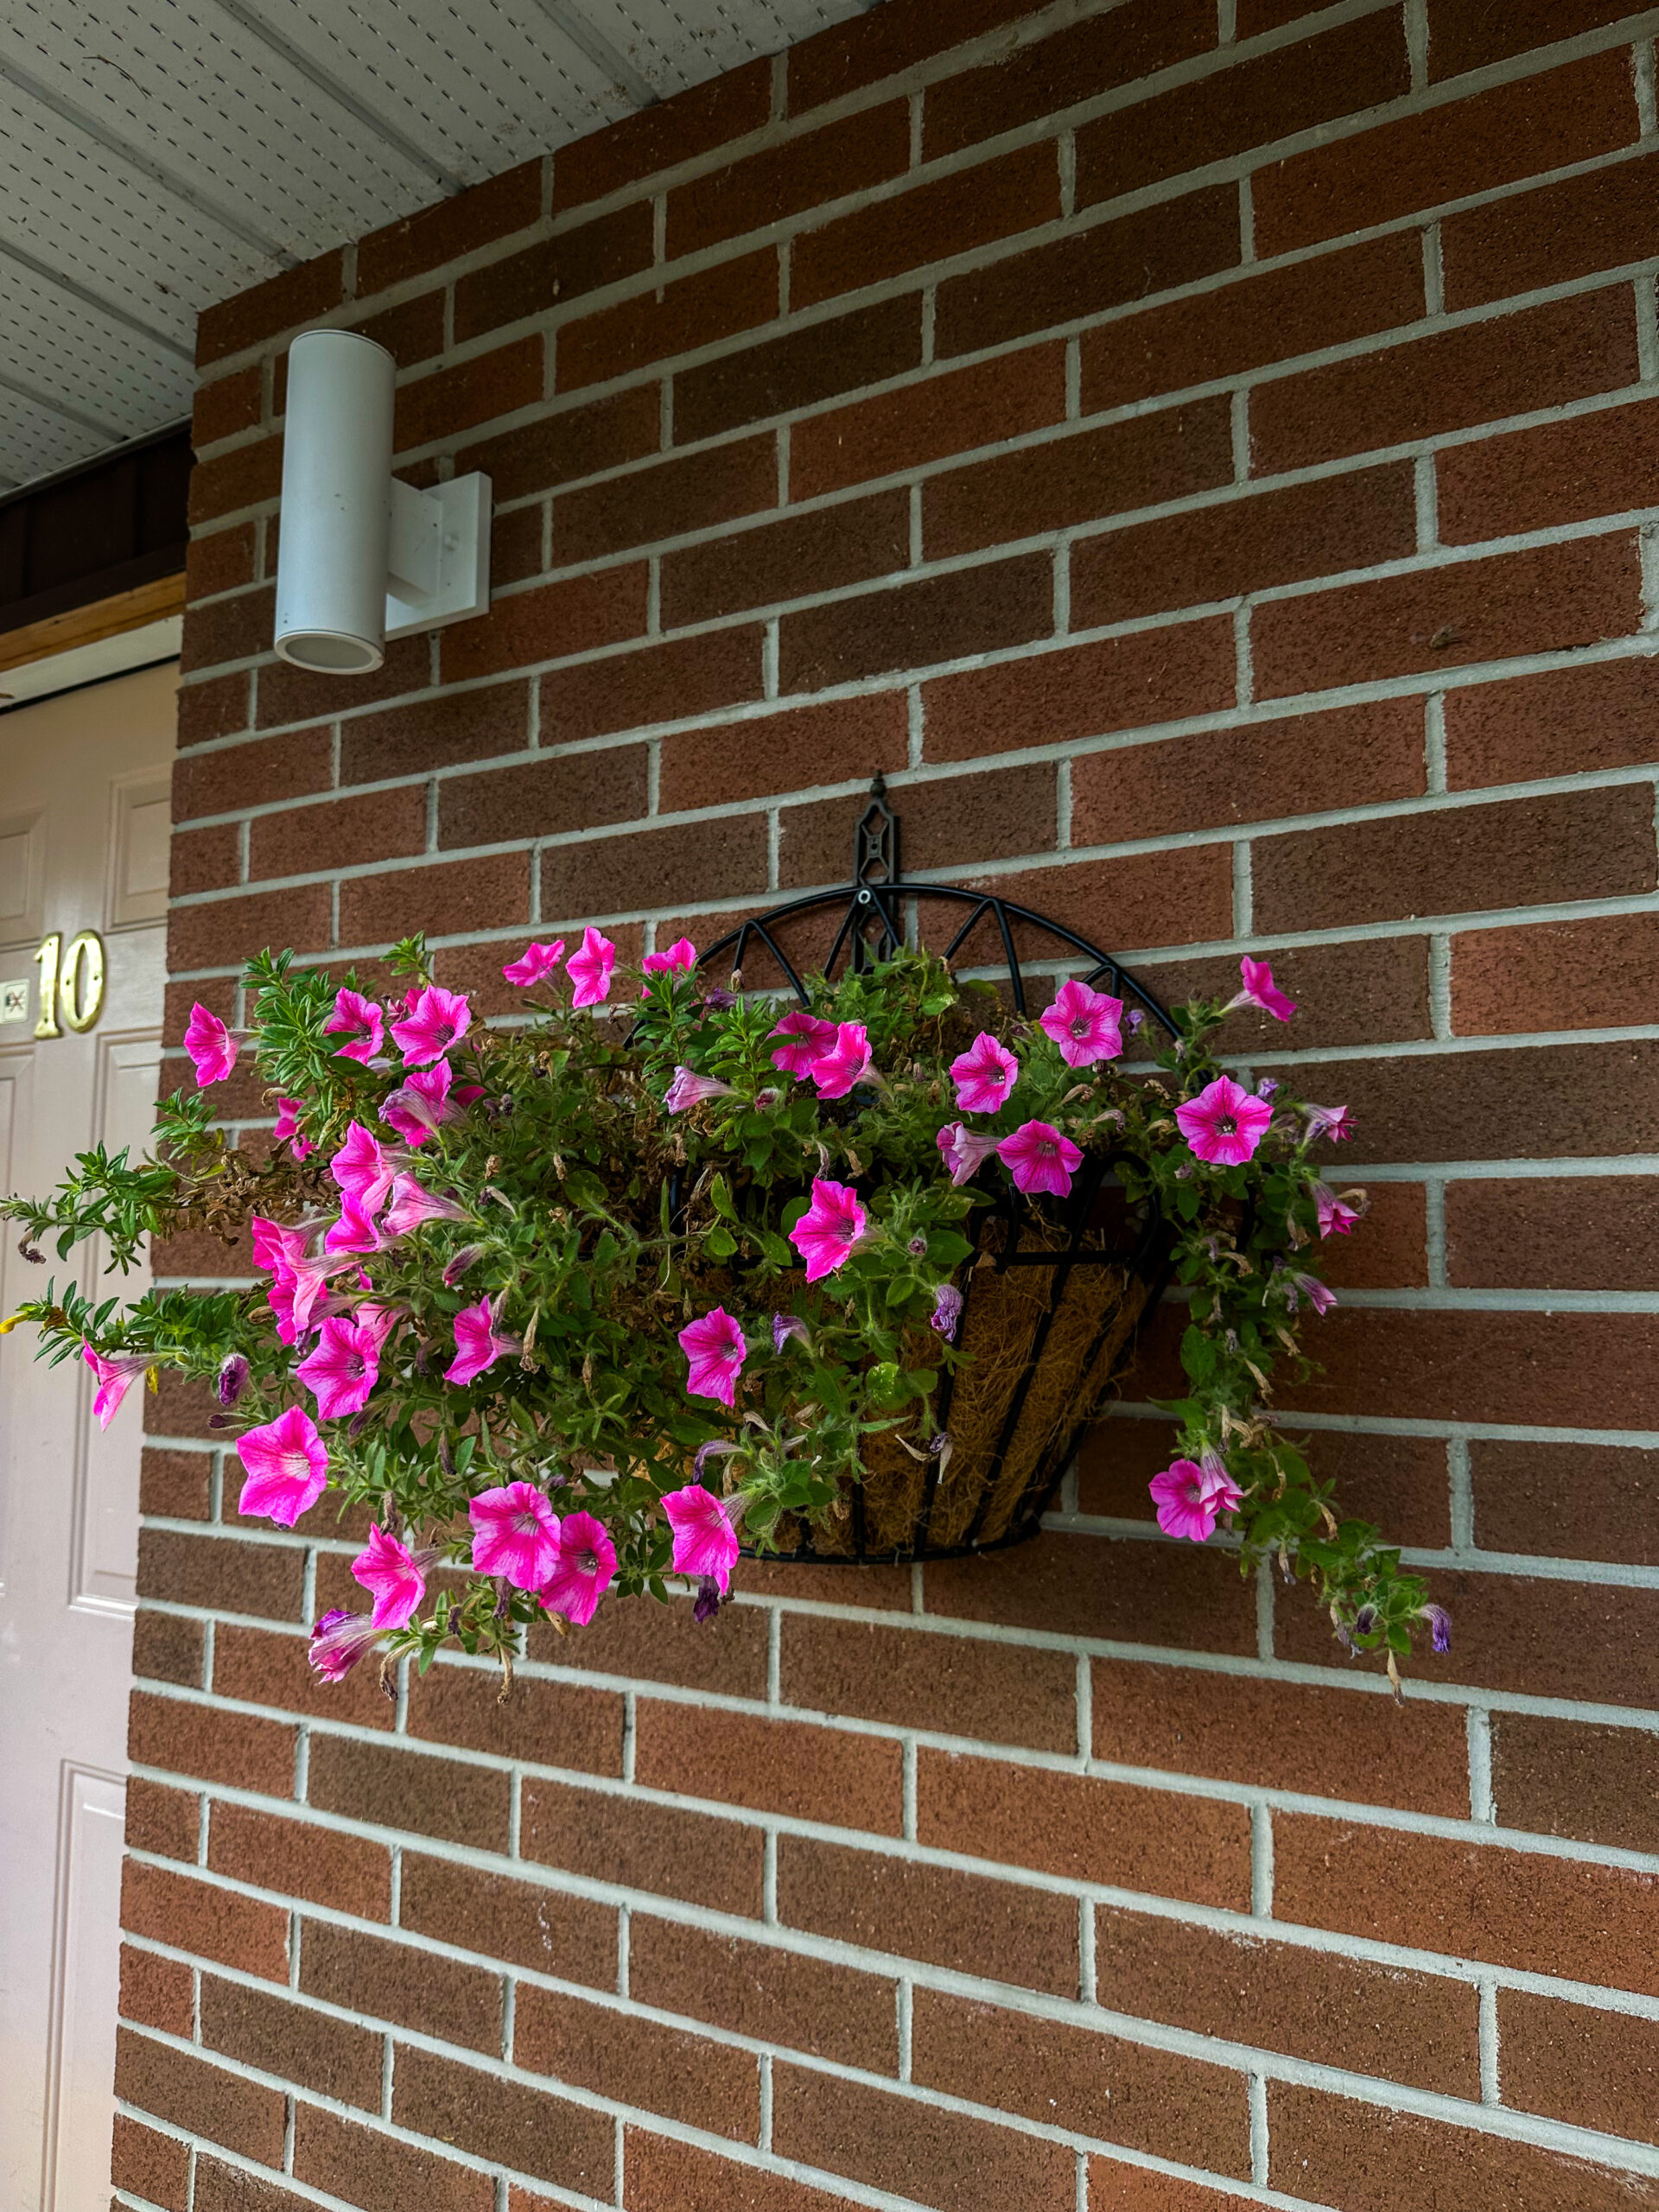 Wasaga beach motel decorated with flowers